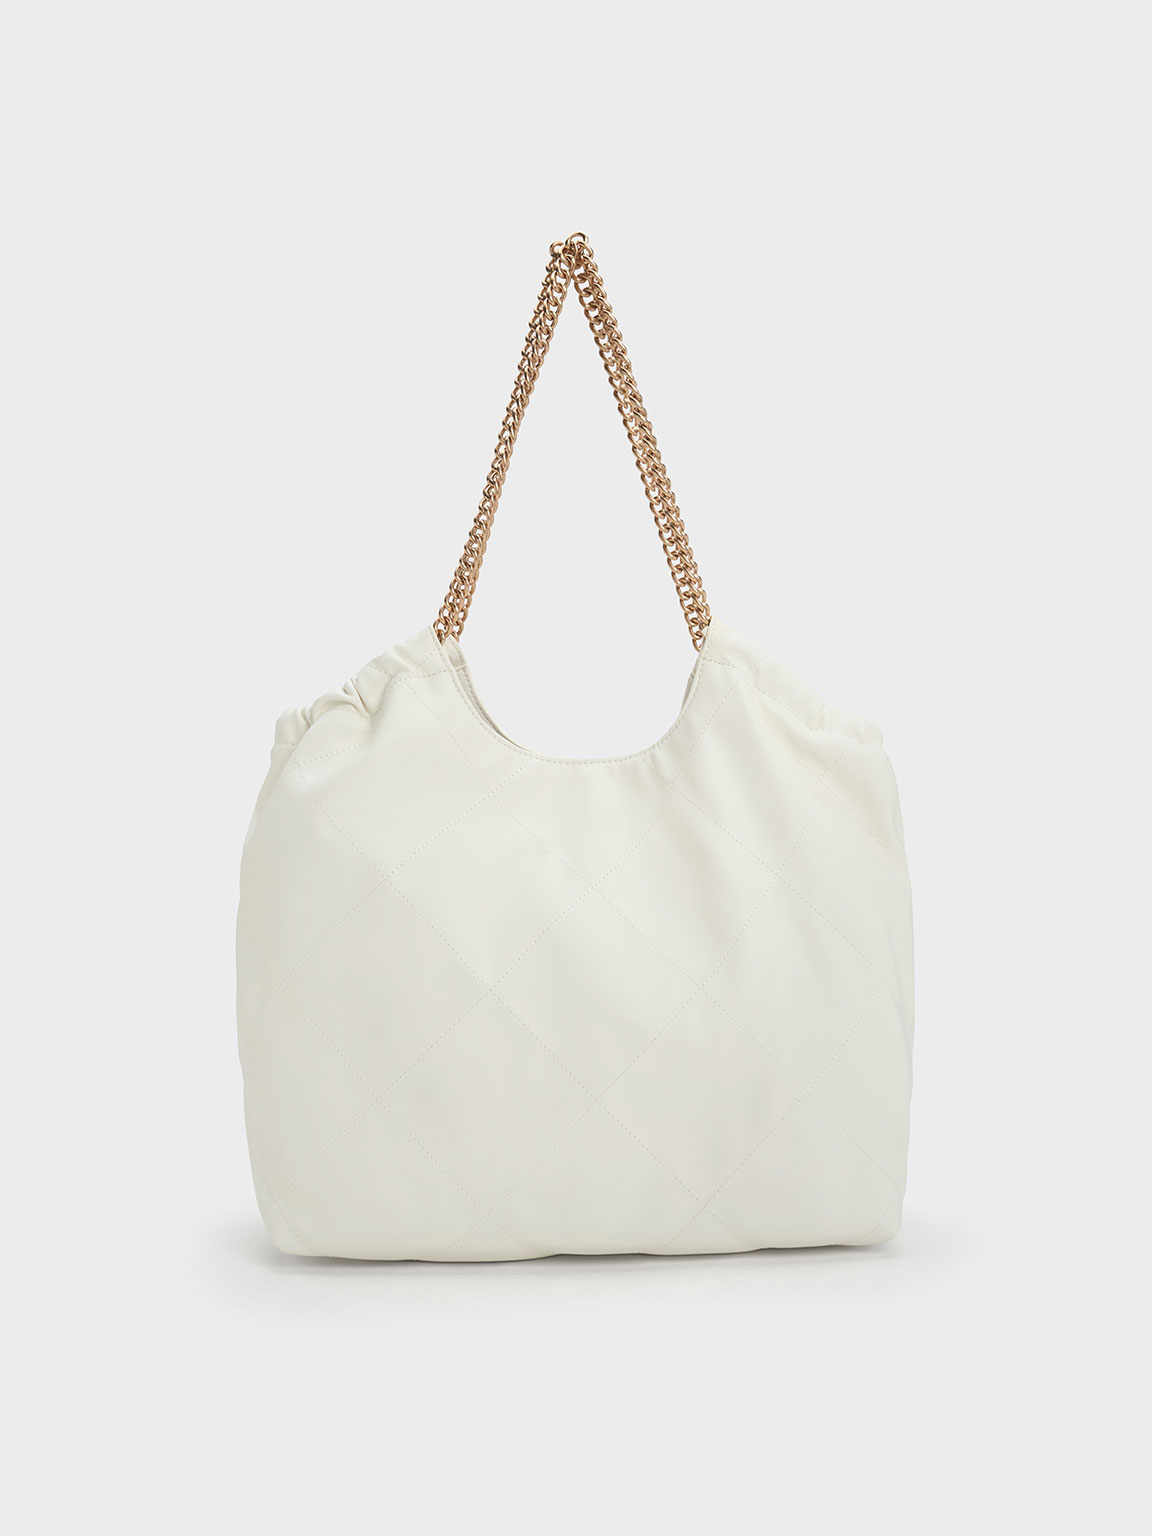 Charles & Keith - Women's Braided Handle Tote Bag, White, XL